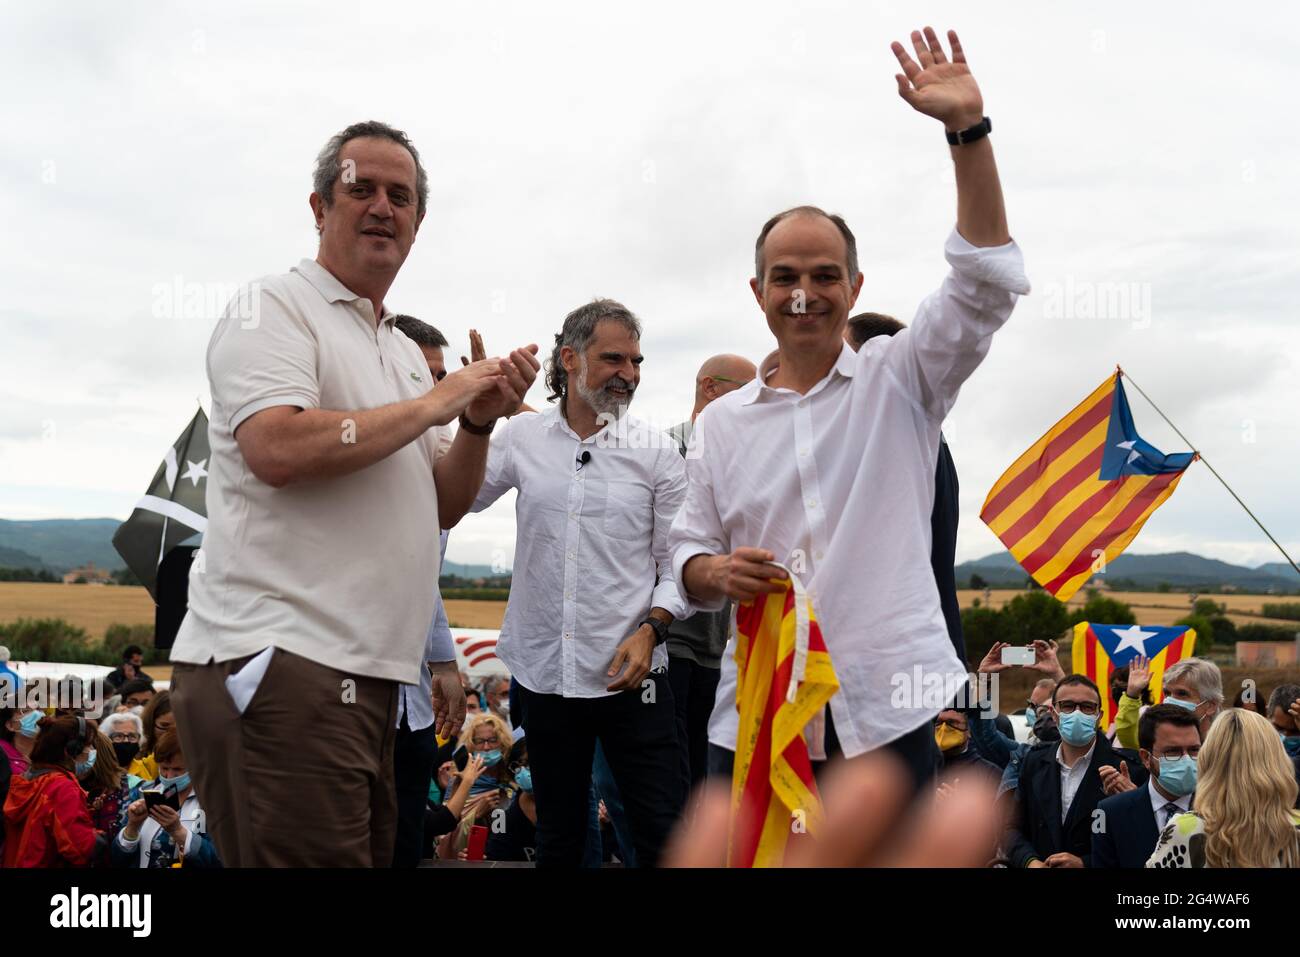 Oriol Junqueras, Raül Romeva, Jordi Turull, Josep Rull, Joaquim Forn, Jordi Cuixart, Jordi Sànchez pose for the press smiling moments after having been freed from prison in Sant Joan de Vilatorada near Barcelona, Spain on June 23, 2021. The nine catalan pro-independence leaders, arrested for their involvement in the 2017 referendum, were freed thanks to the pardon granted by spanish PM Pedro Sanchez, in an effort to ease tensions with the catalan separatists and start a new phase of dialogue. (Photo by Davide Bonaldo/Sipa USA) Stock Photo